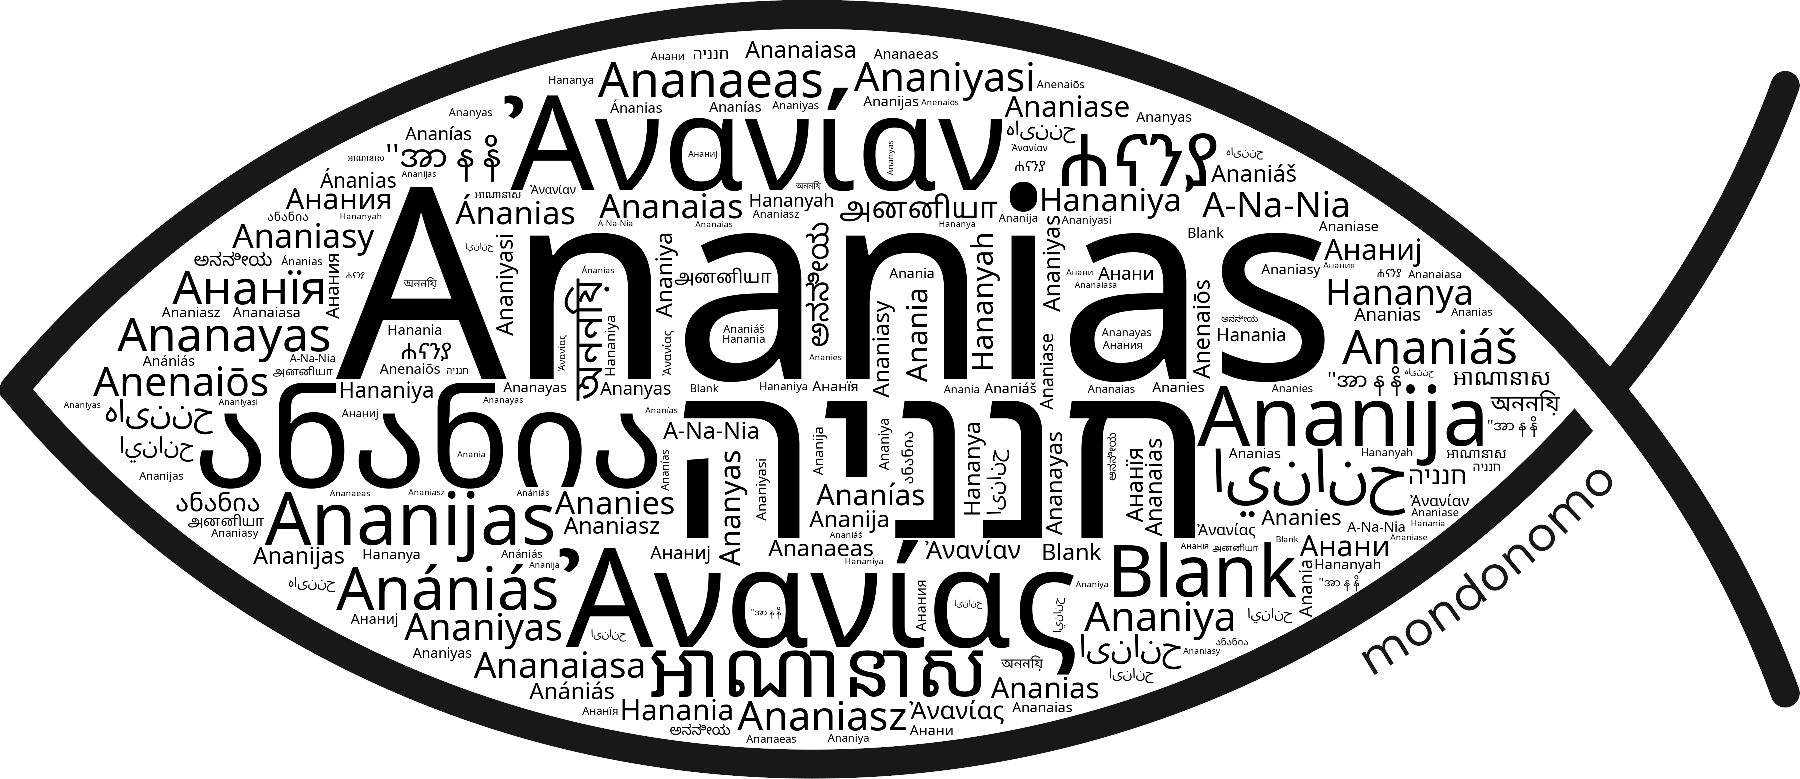 Name Ananias in the world's Bibles